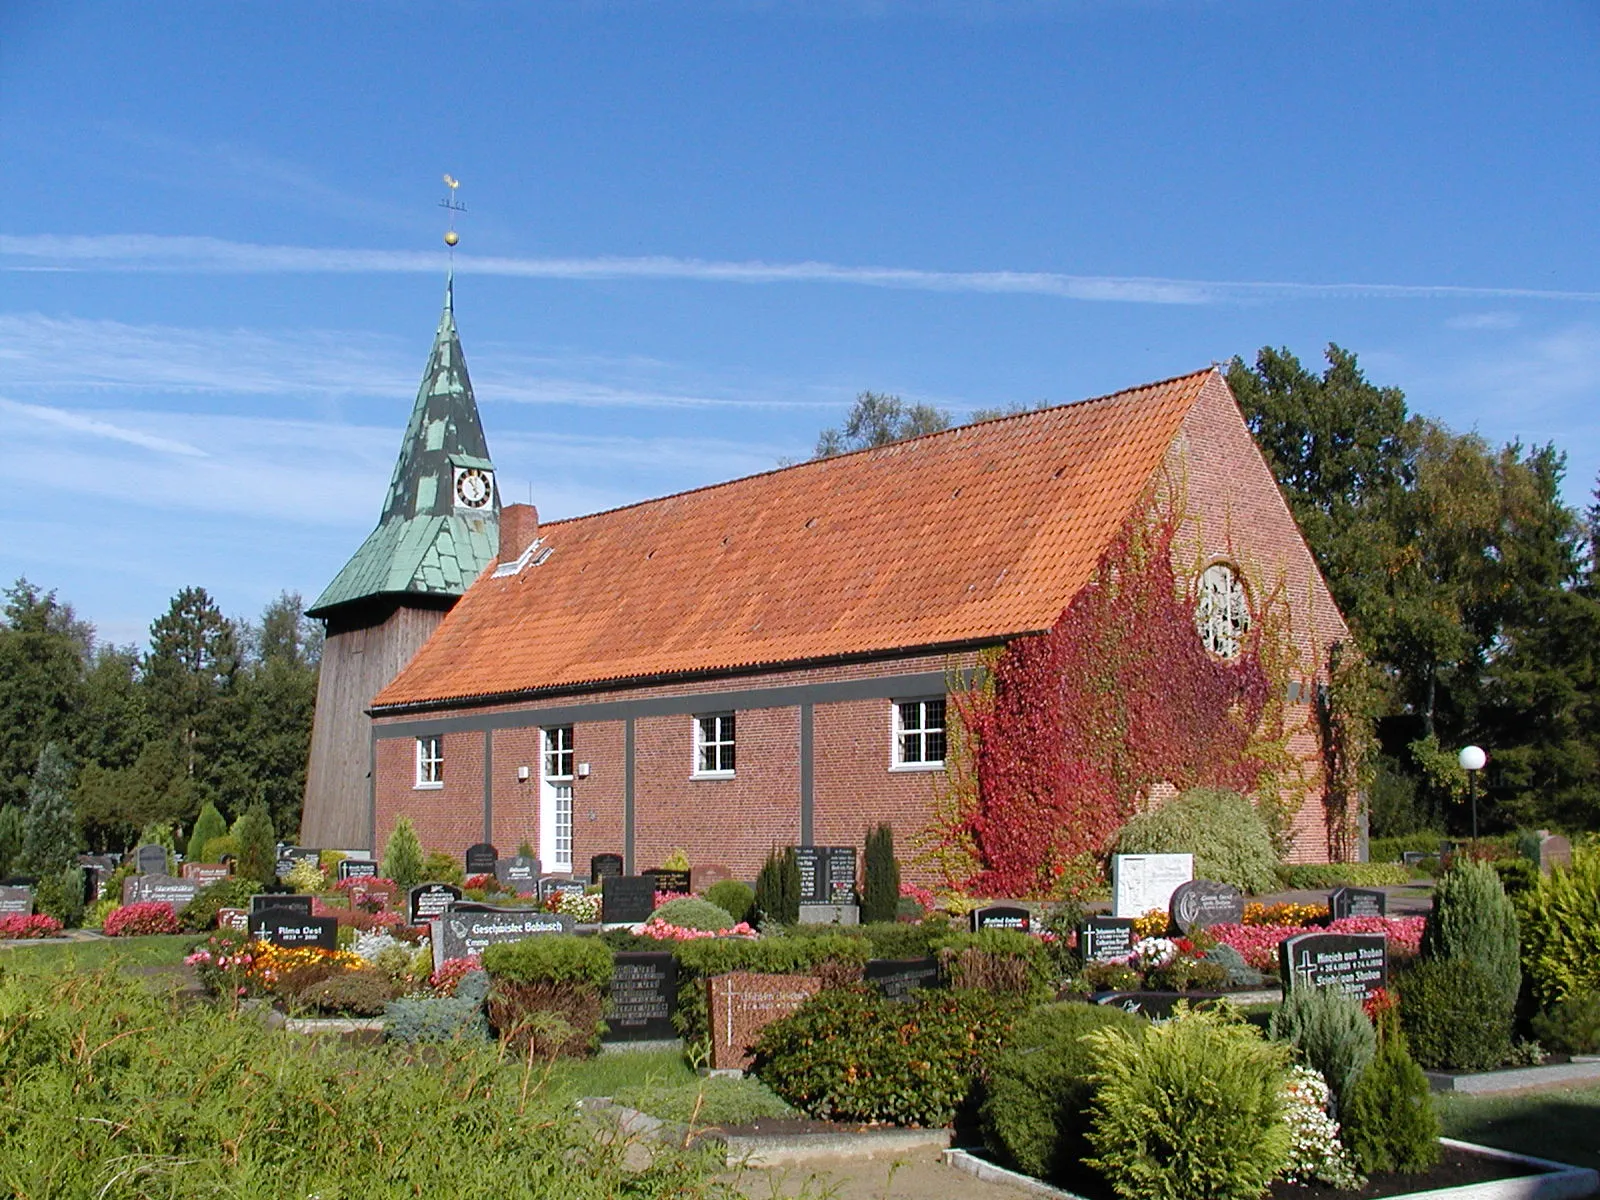 Photo showing: The Evangelical Lutheran St. Josse Church in Odisheim, Lower Saxony, Germany.